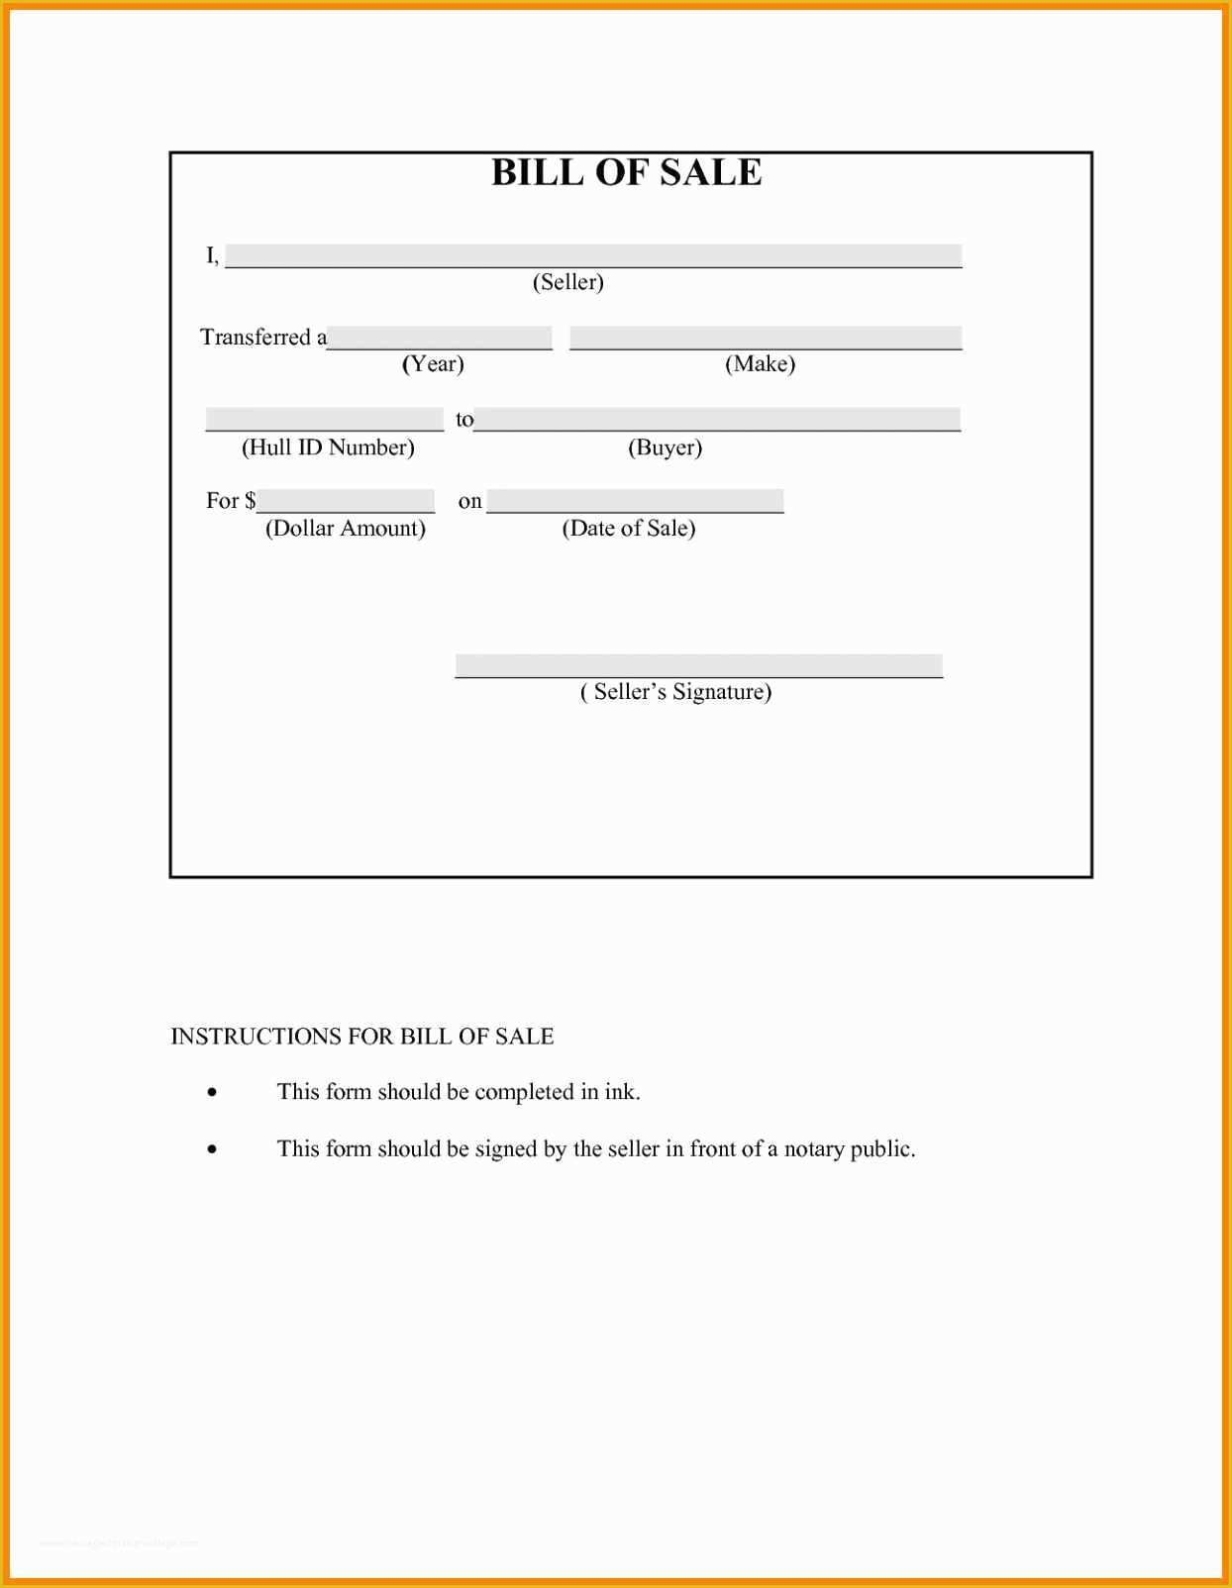 Auto Insurance Card Template Free Download Of Insurance Card Template Free The 11 Secrets That Inside Auto Insurance Card Template Free Download